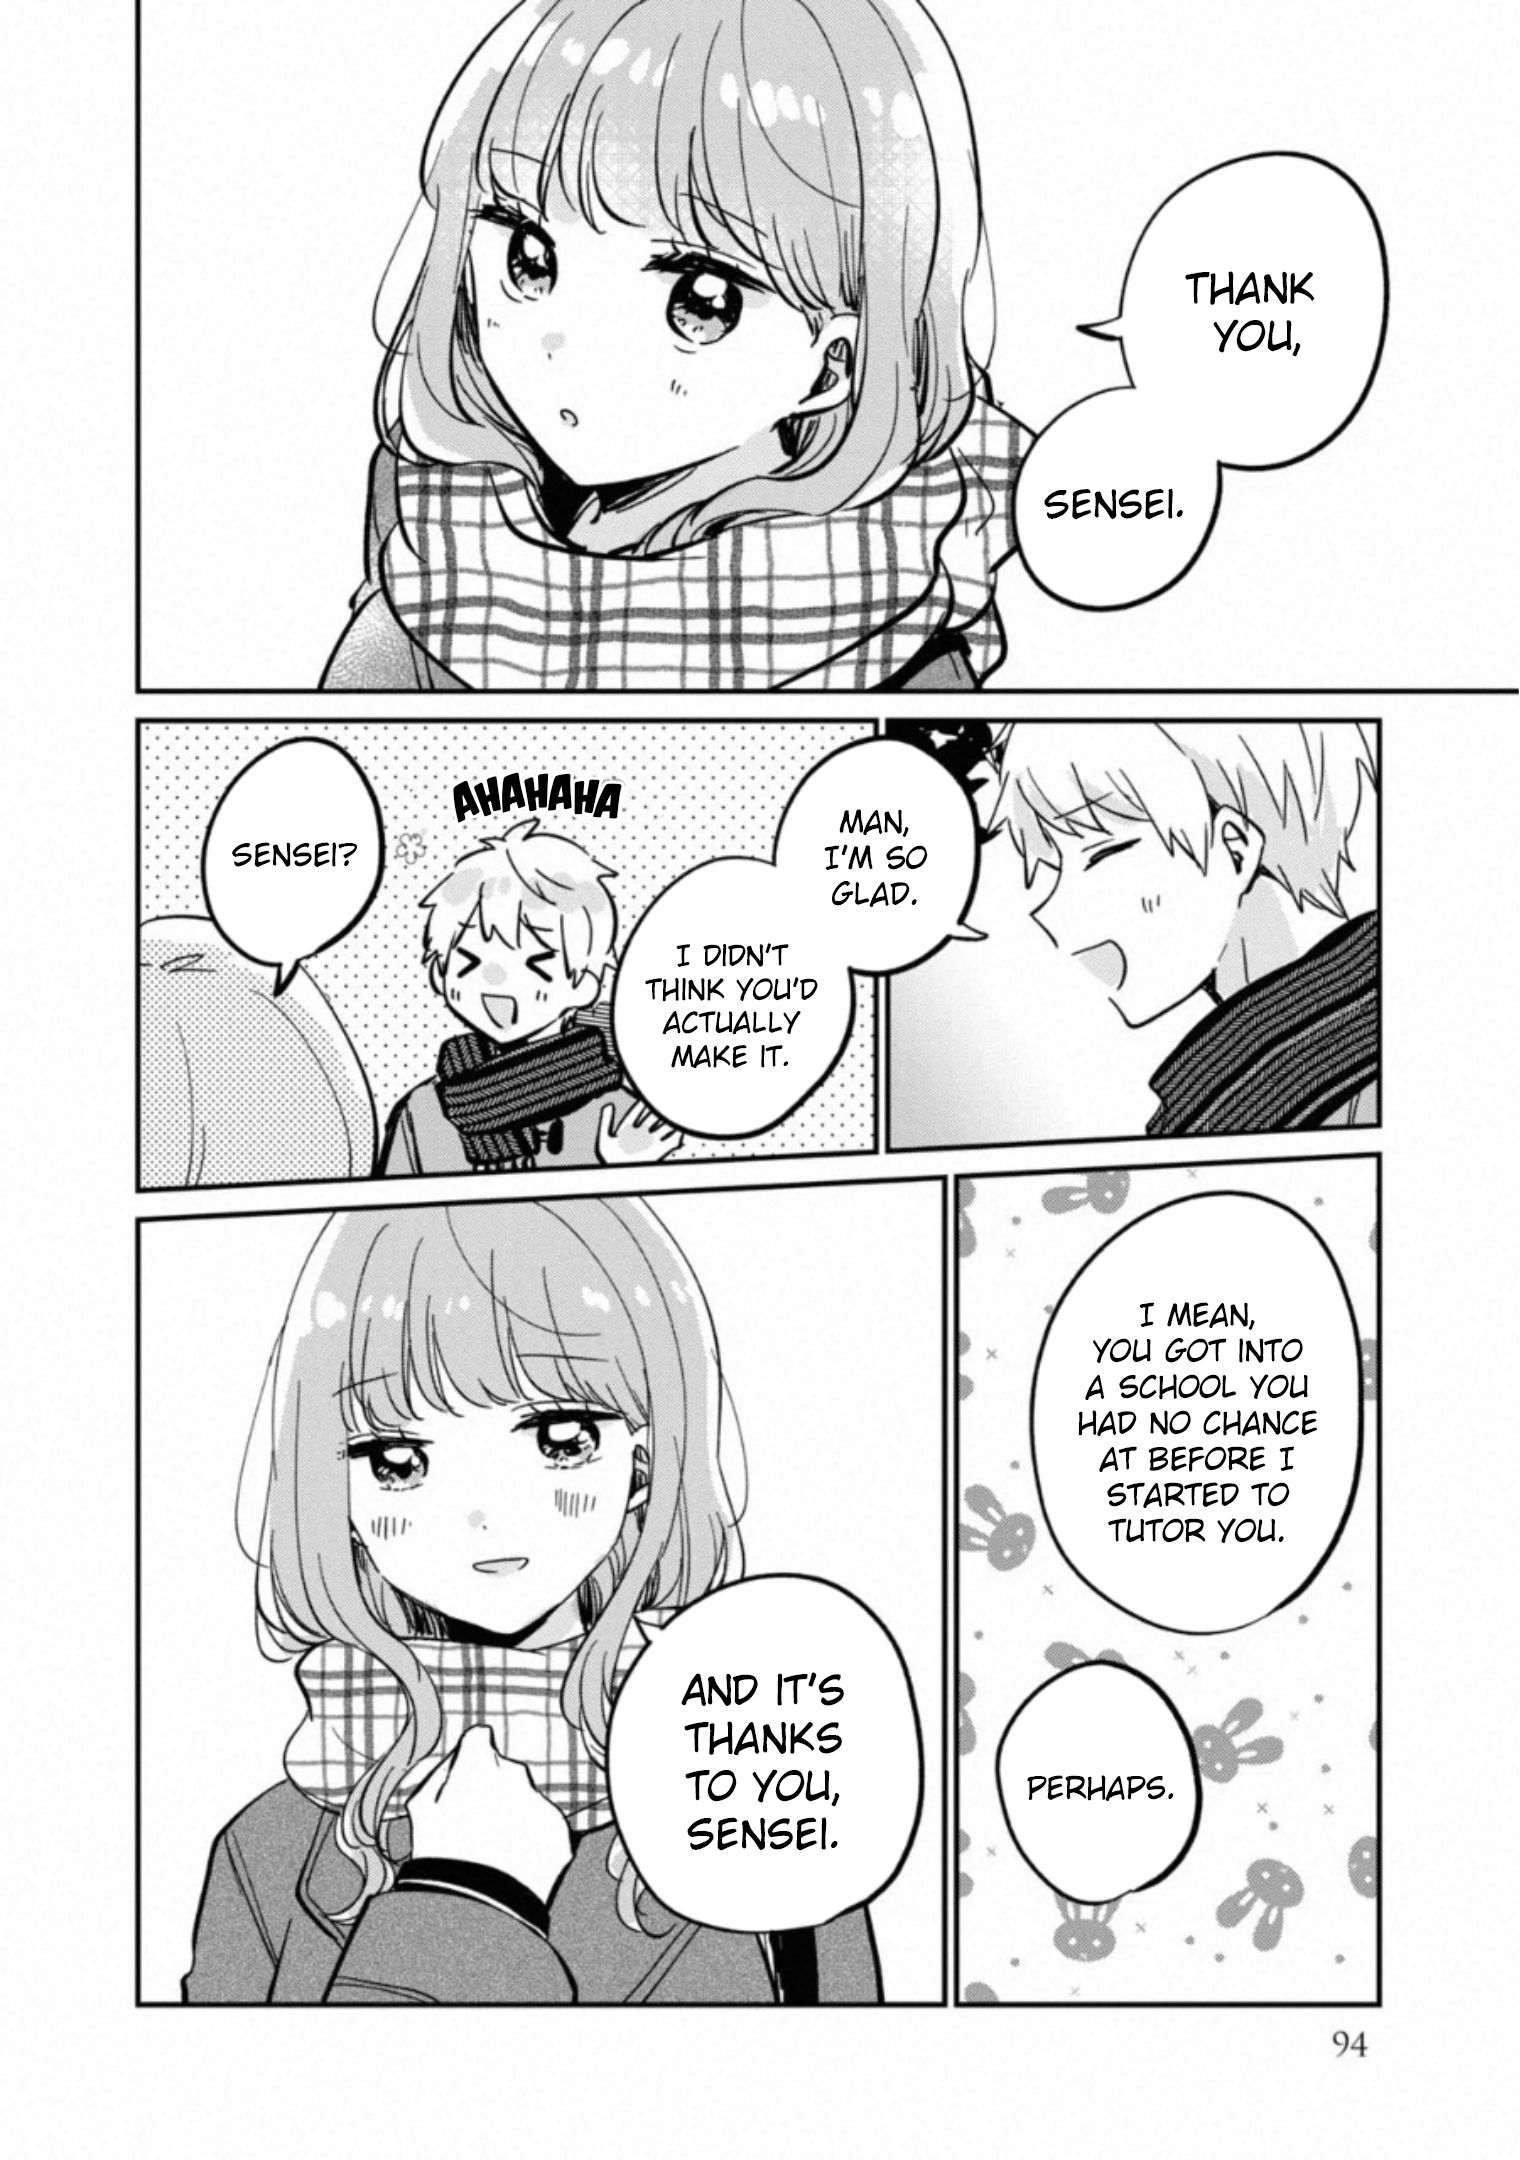 It's Not Meguro-san's First Time chapter 30.5 page 3